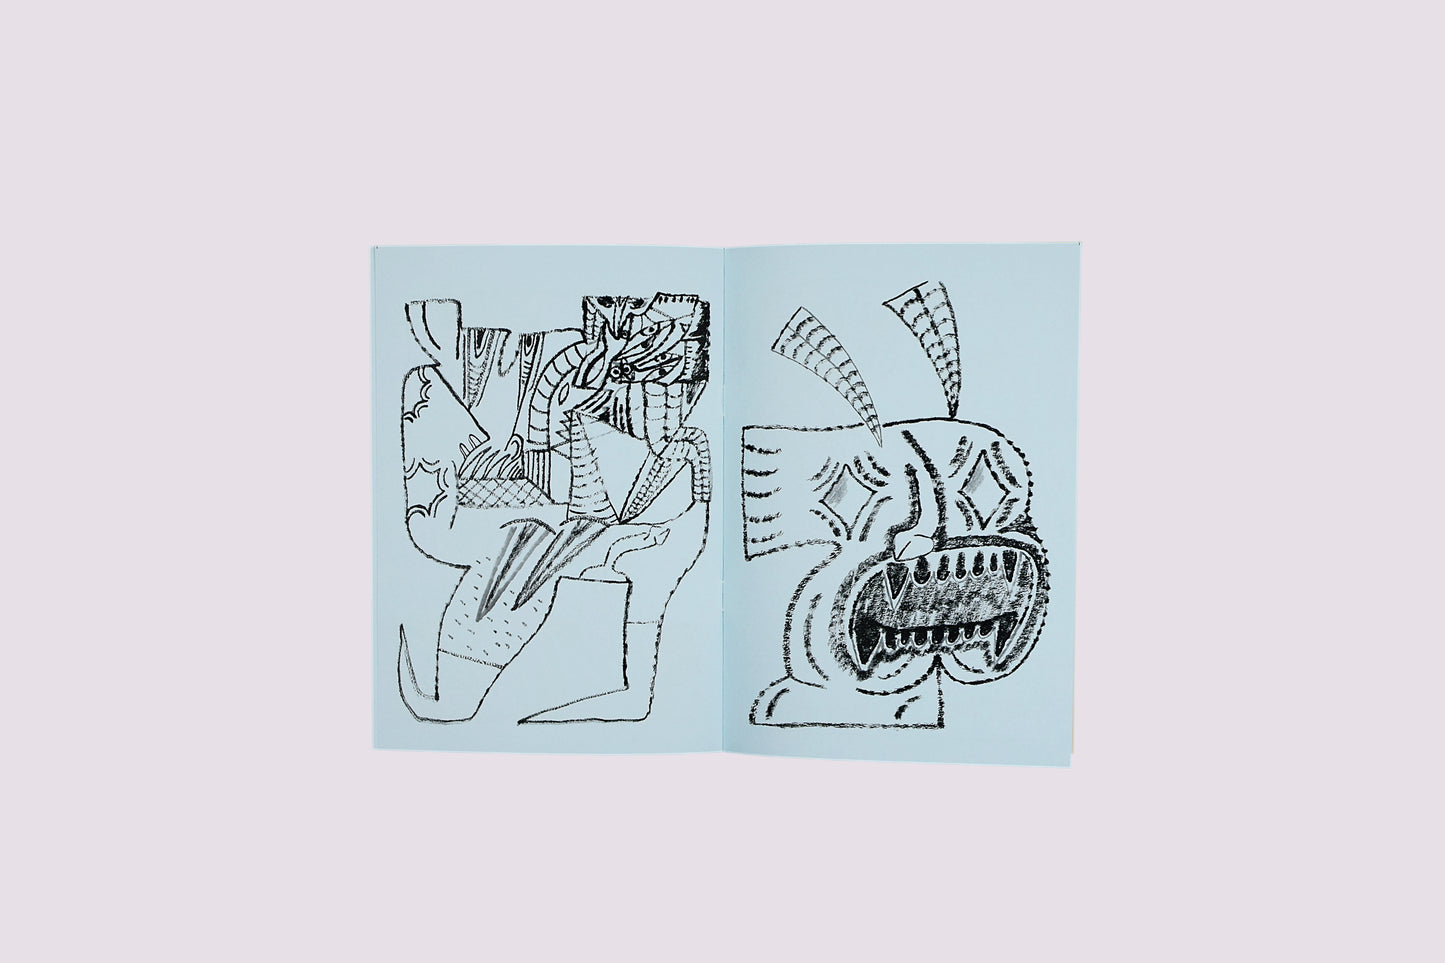 Baloney Poppers/Devendra Banhart published by Nieves